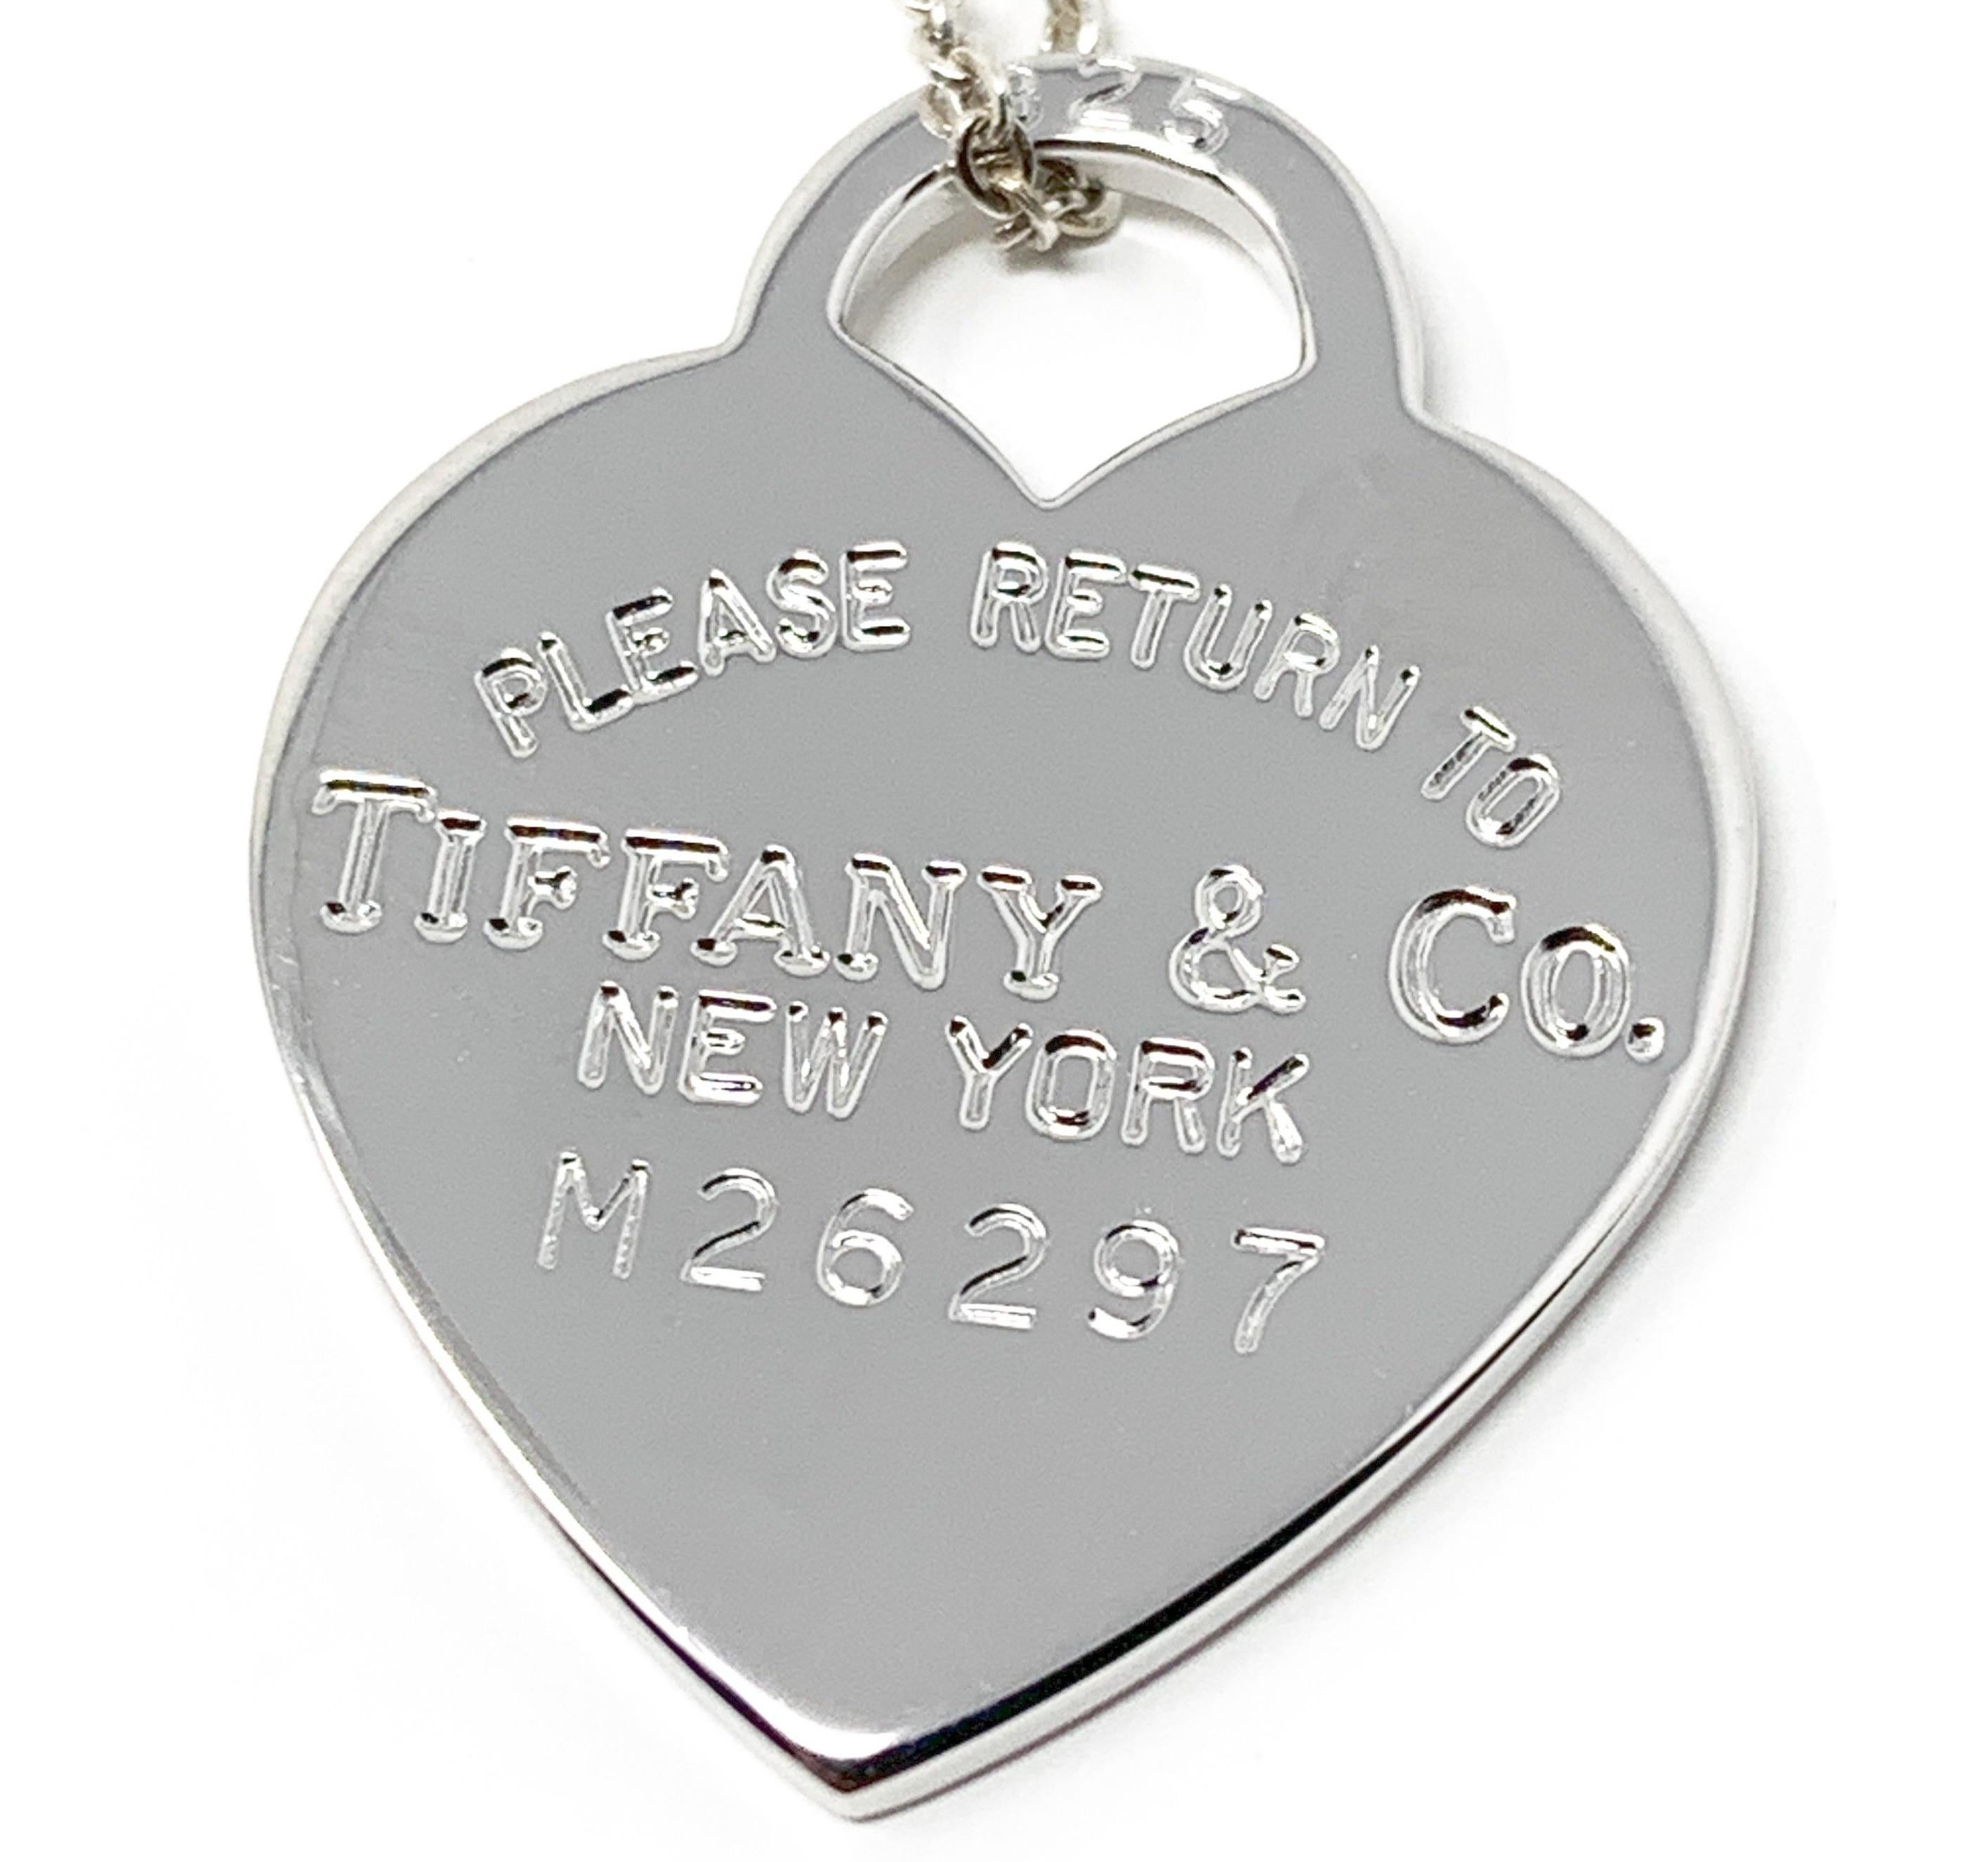 Tiffany & Co.925 Silver Heart White Gold Plated Charm Pendant